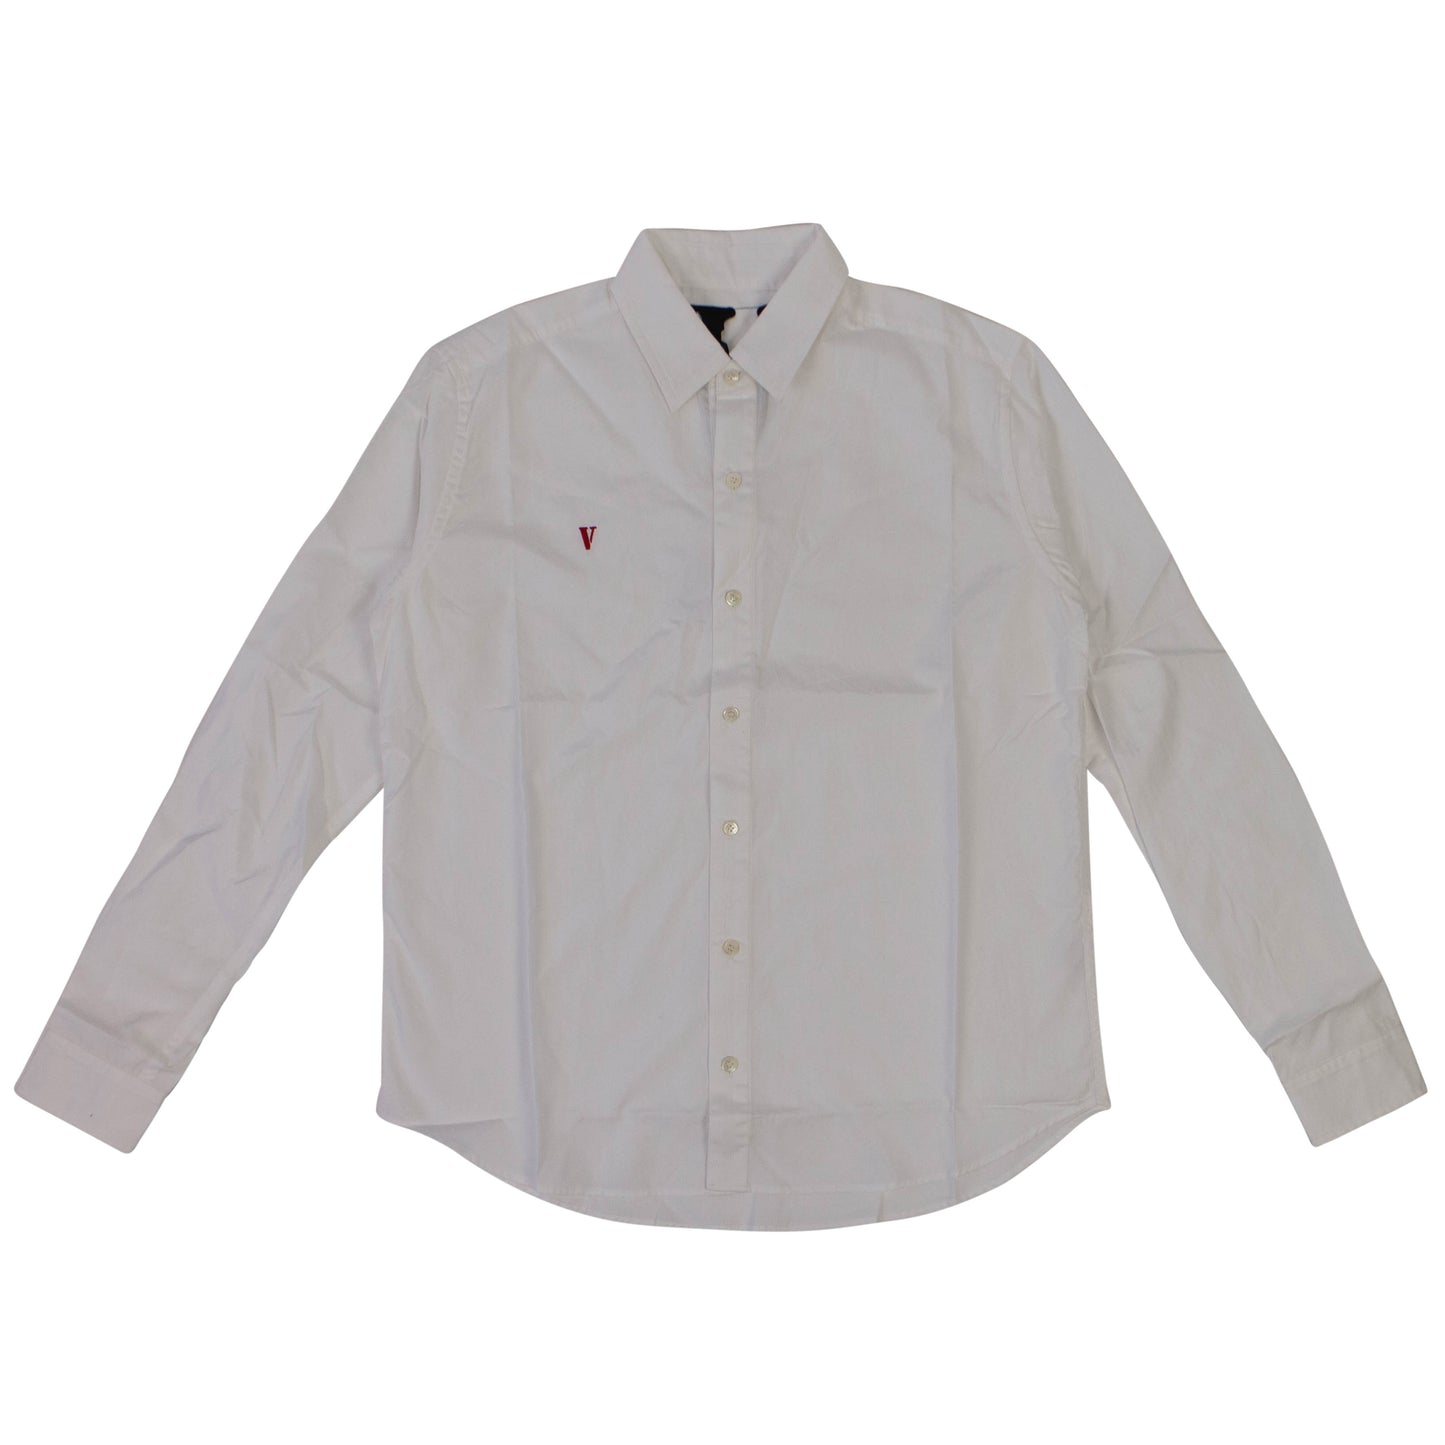 Vlone Button-Up Shirt - White/Red